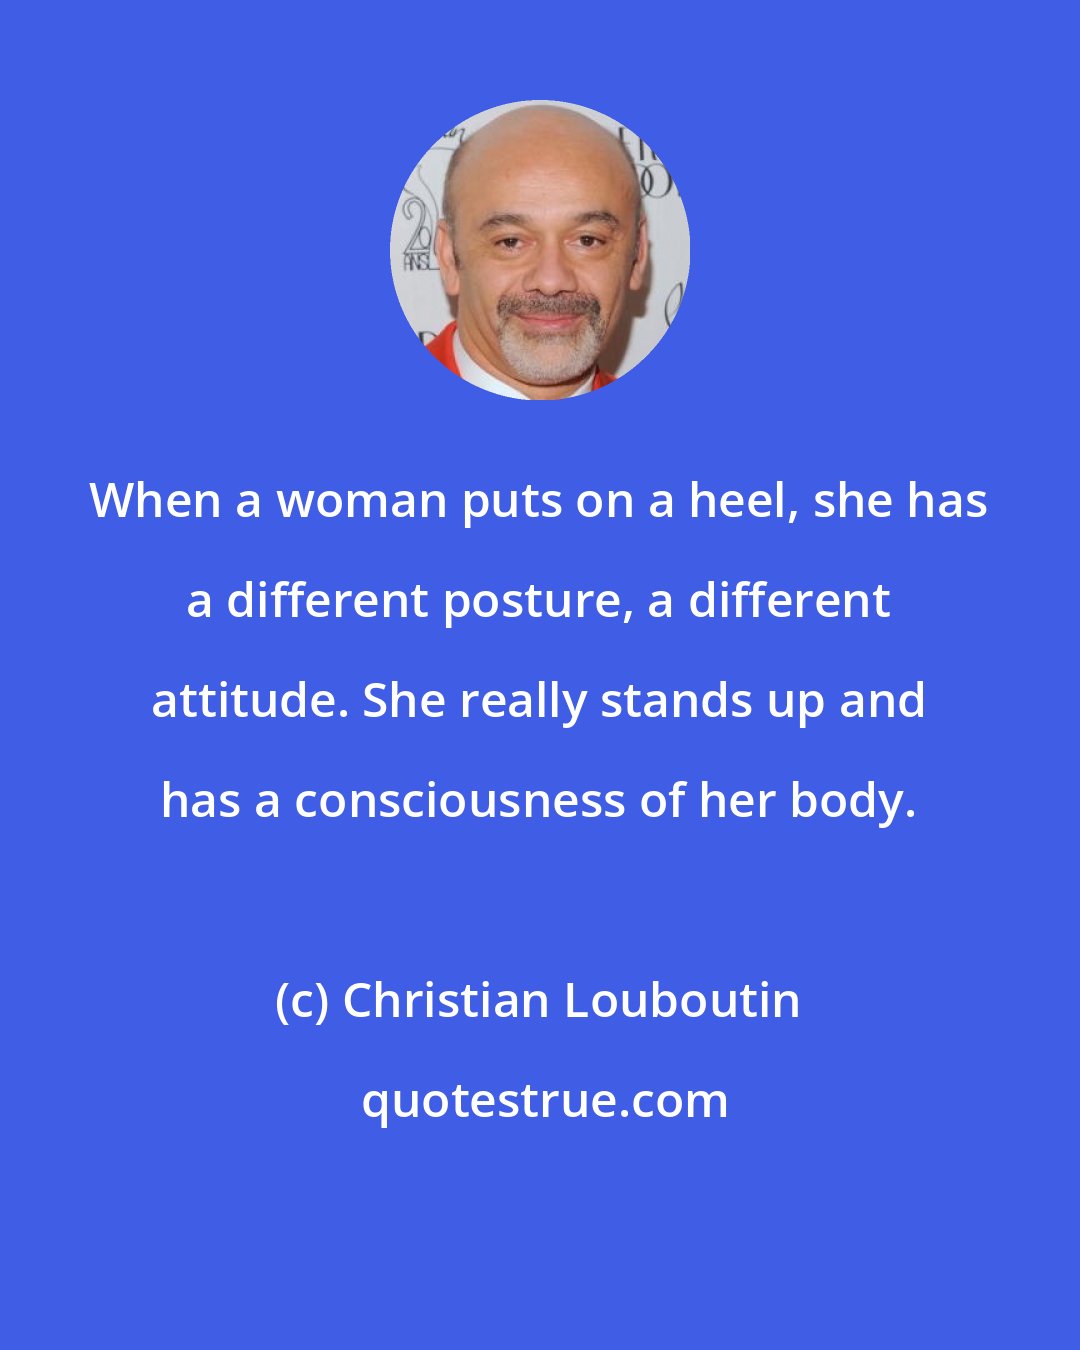 Christian Louboutin: When a woman puts on a heel, she has a different posture, a different attitude. She really stands up and has a consciousness of her body.